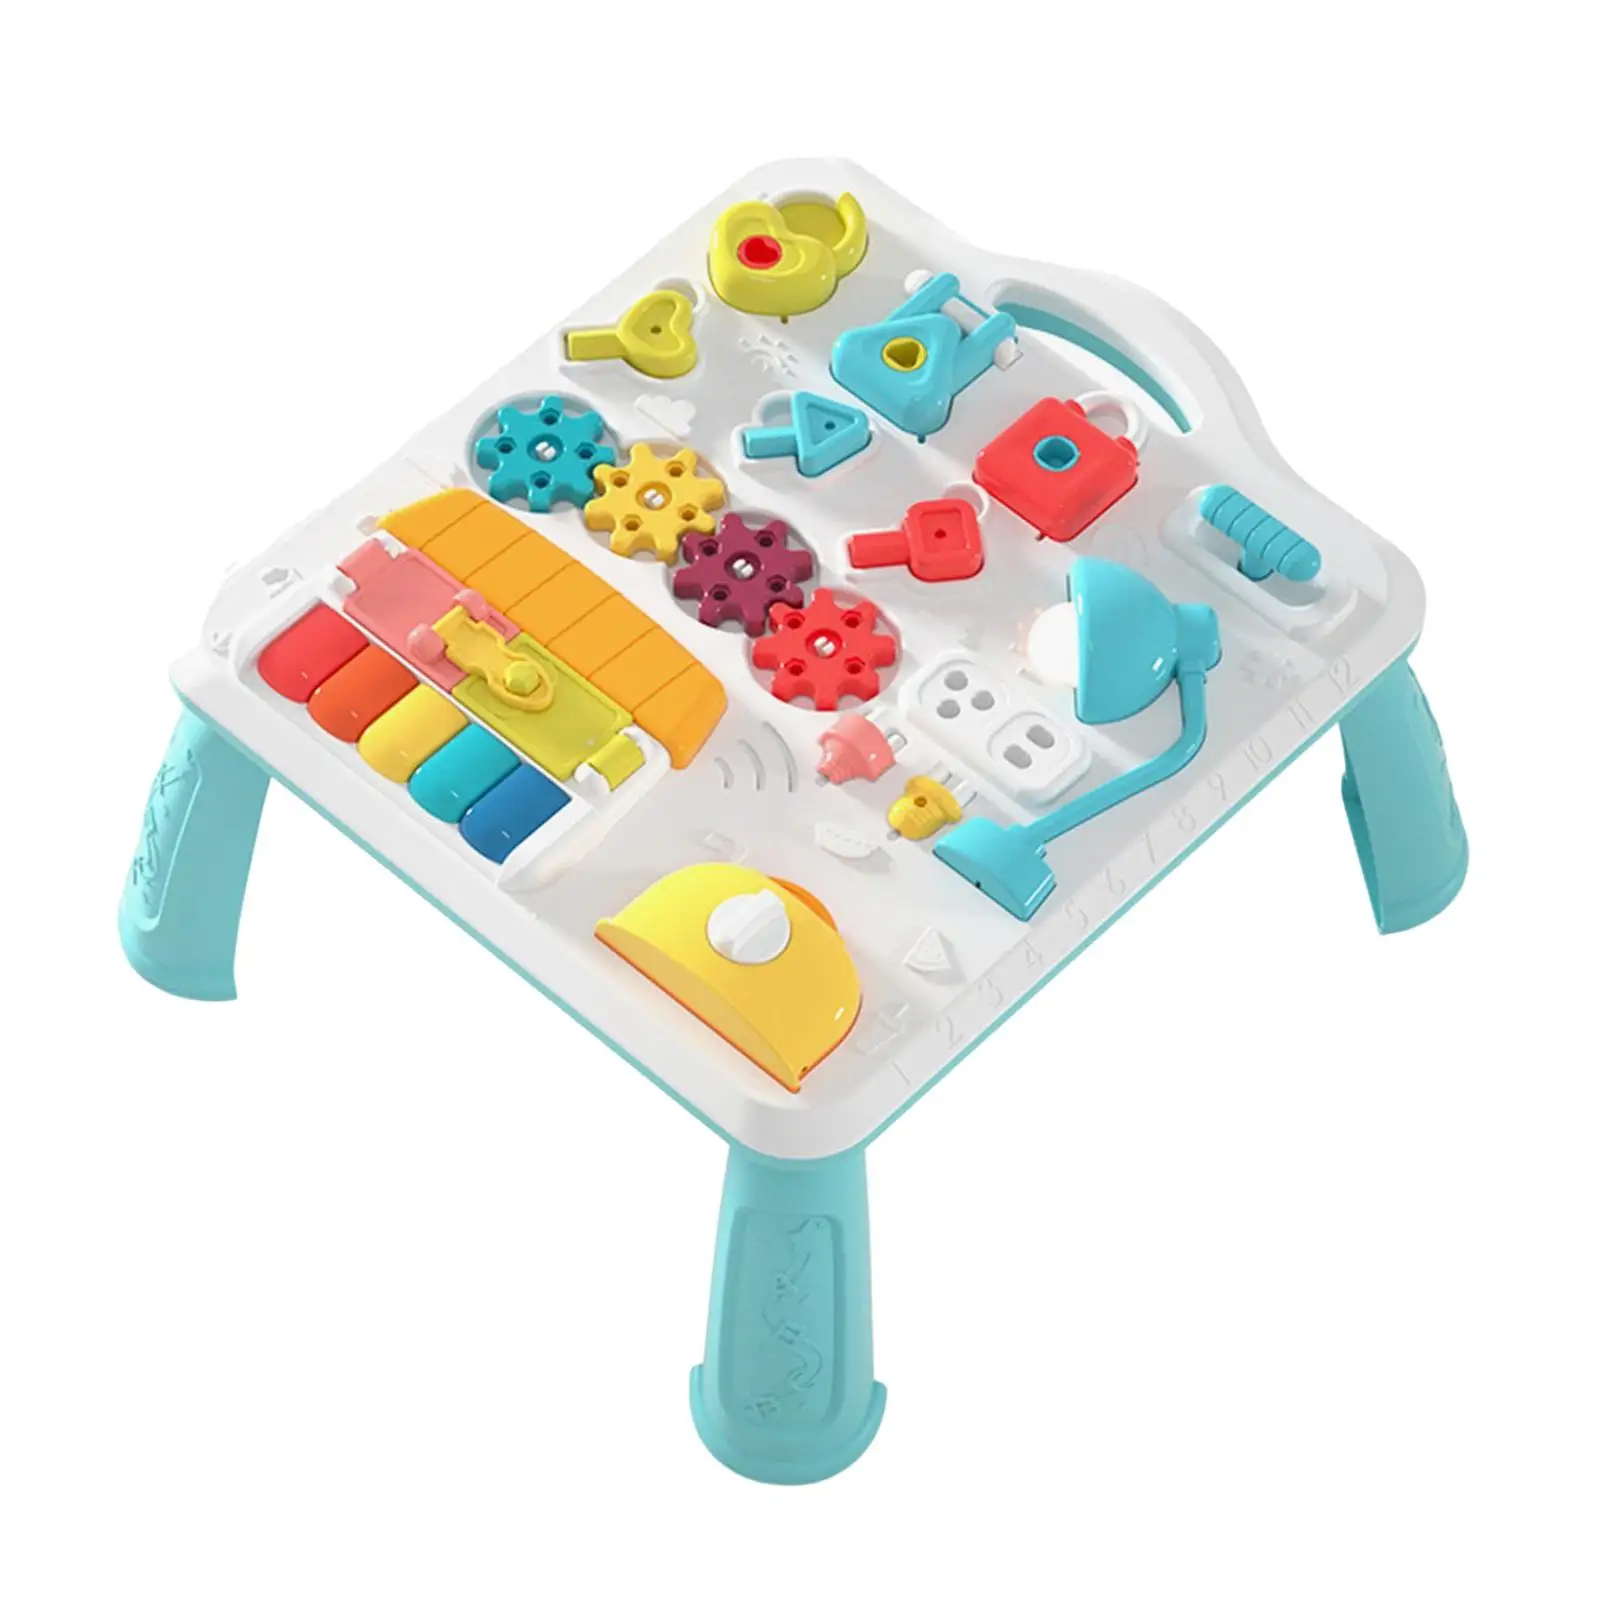 Multifunctional Learning table Teaching Aids Educational Toy for Boys